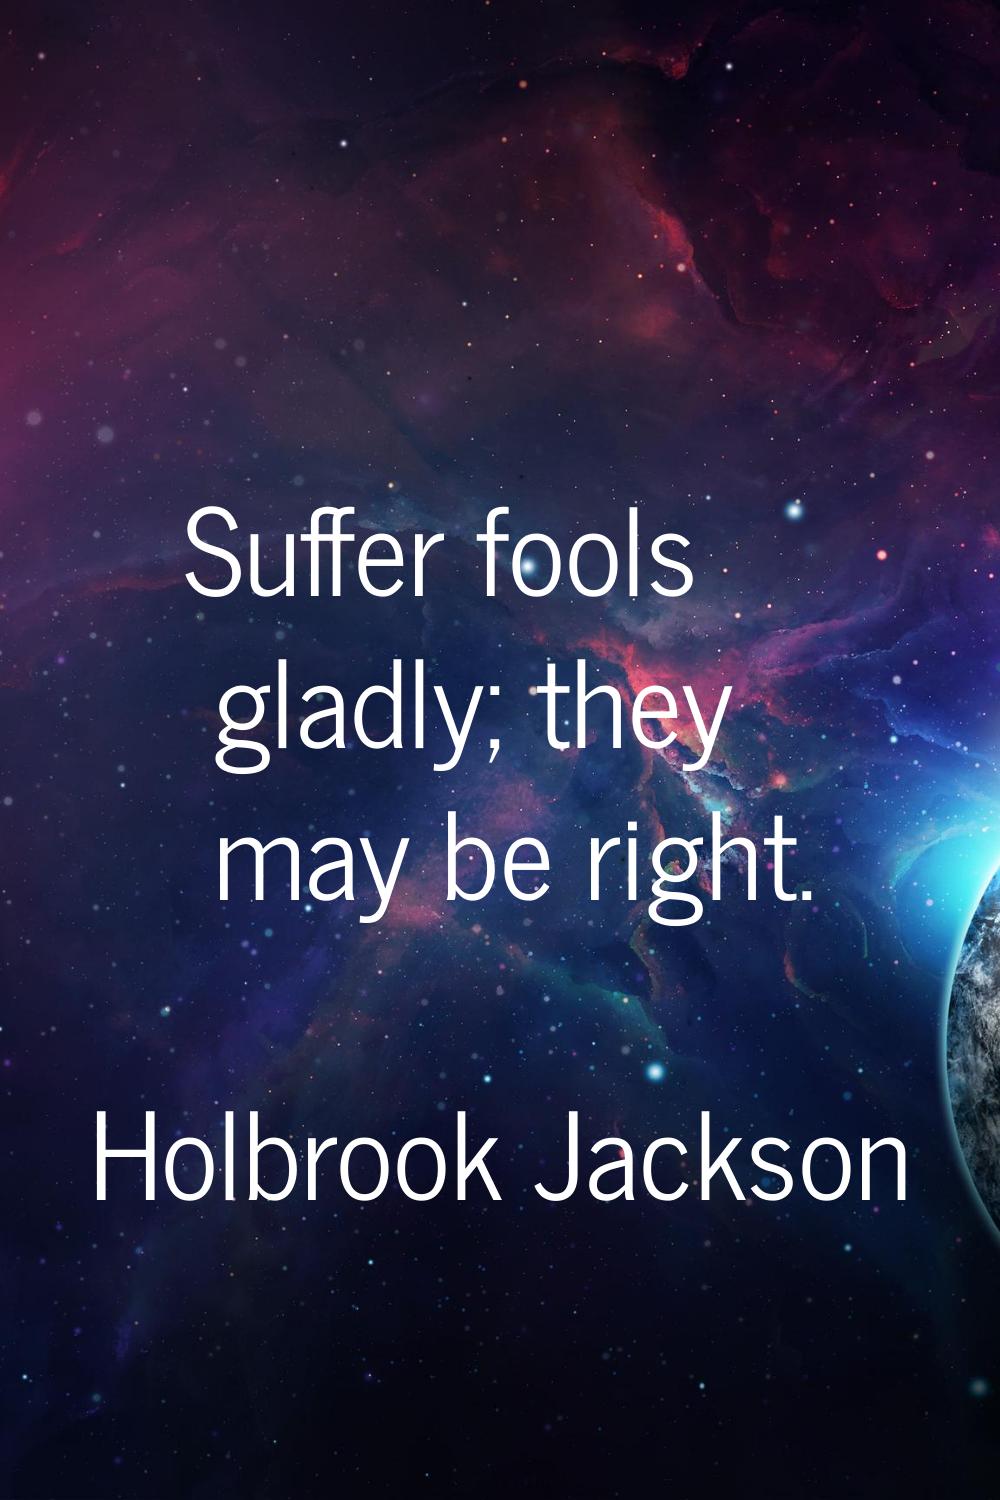 Suffer fools gladly; they may be right.